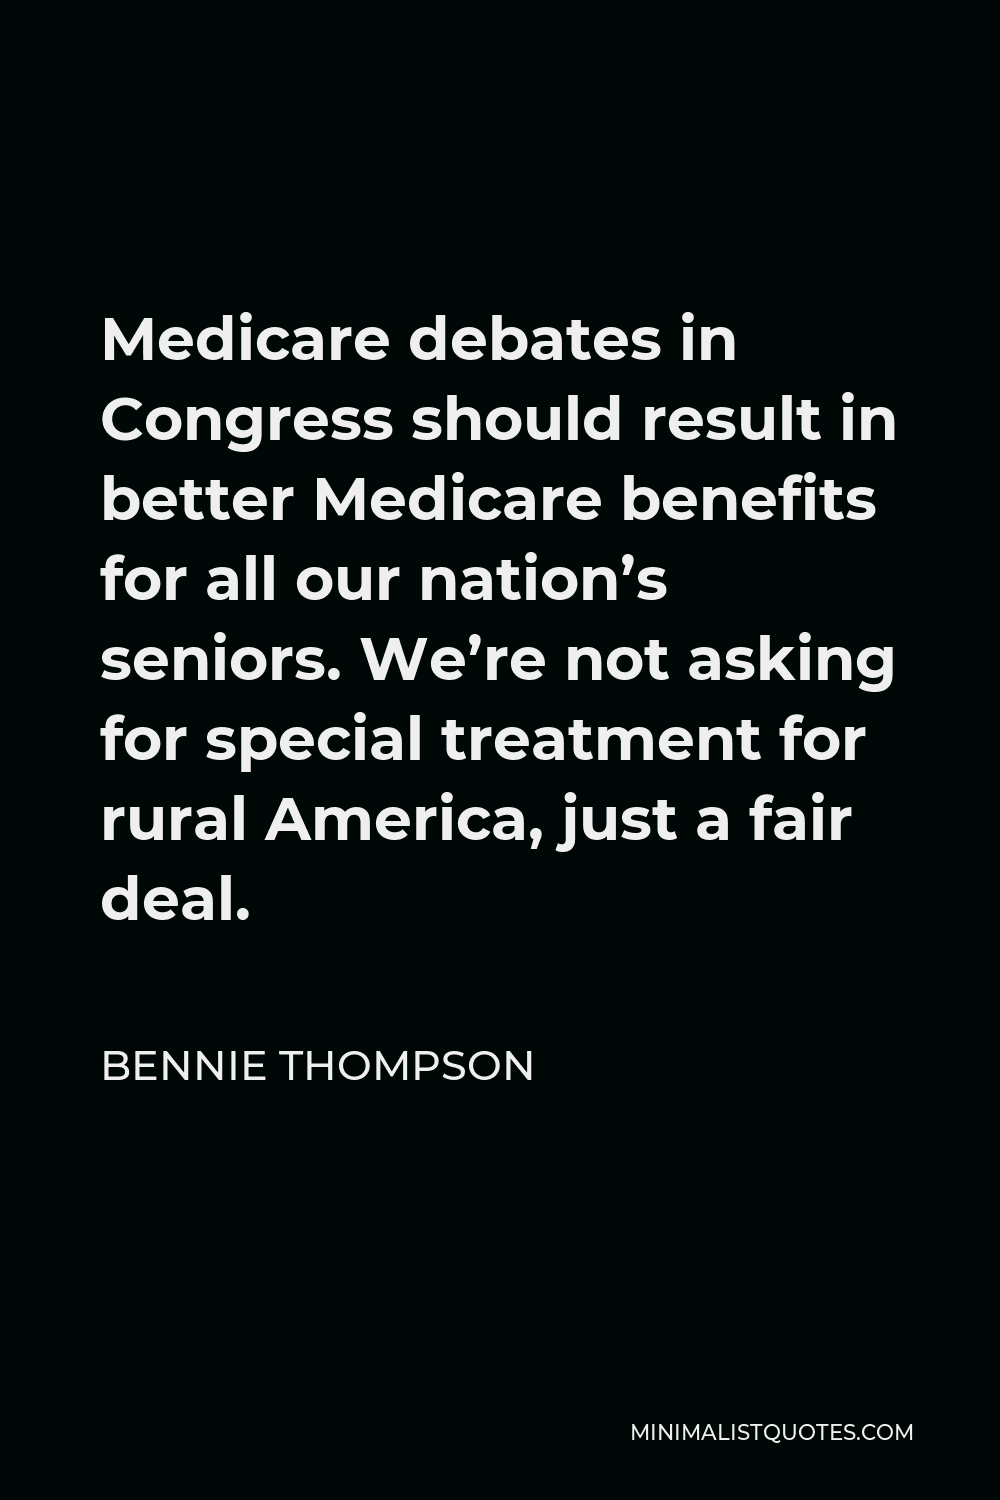 Bennie Thompson Quote - Medicare debates in Congress should result in better Medicare benefits for all our nation’s seniors. We’re not asking for special treatment for rural America, just a fair deal.